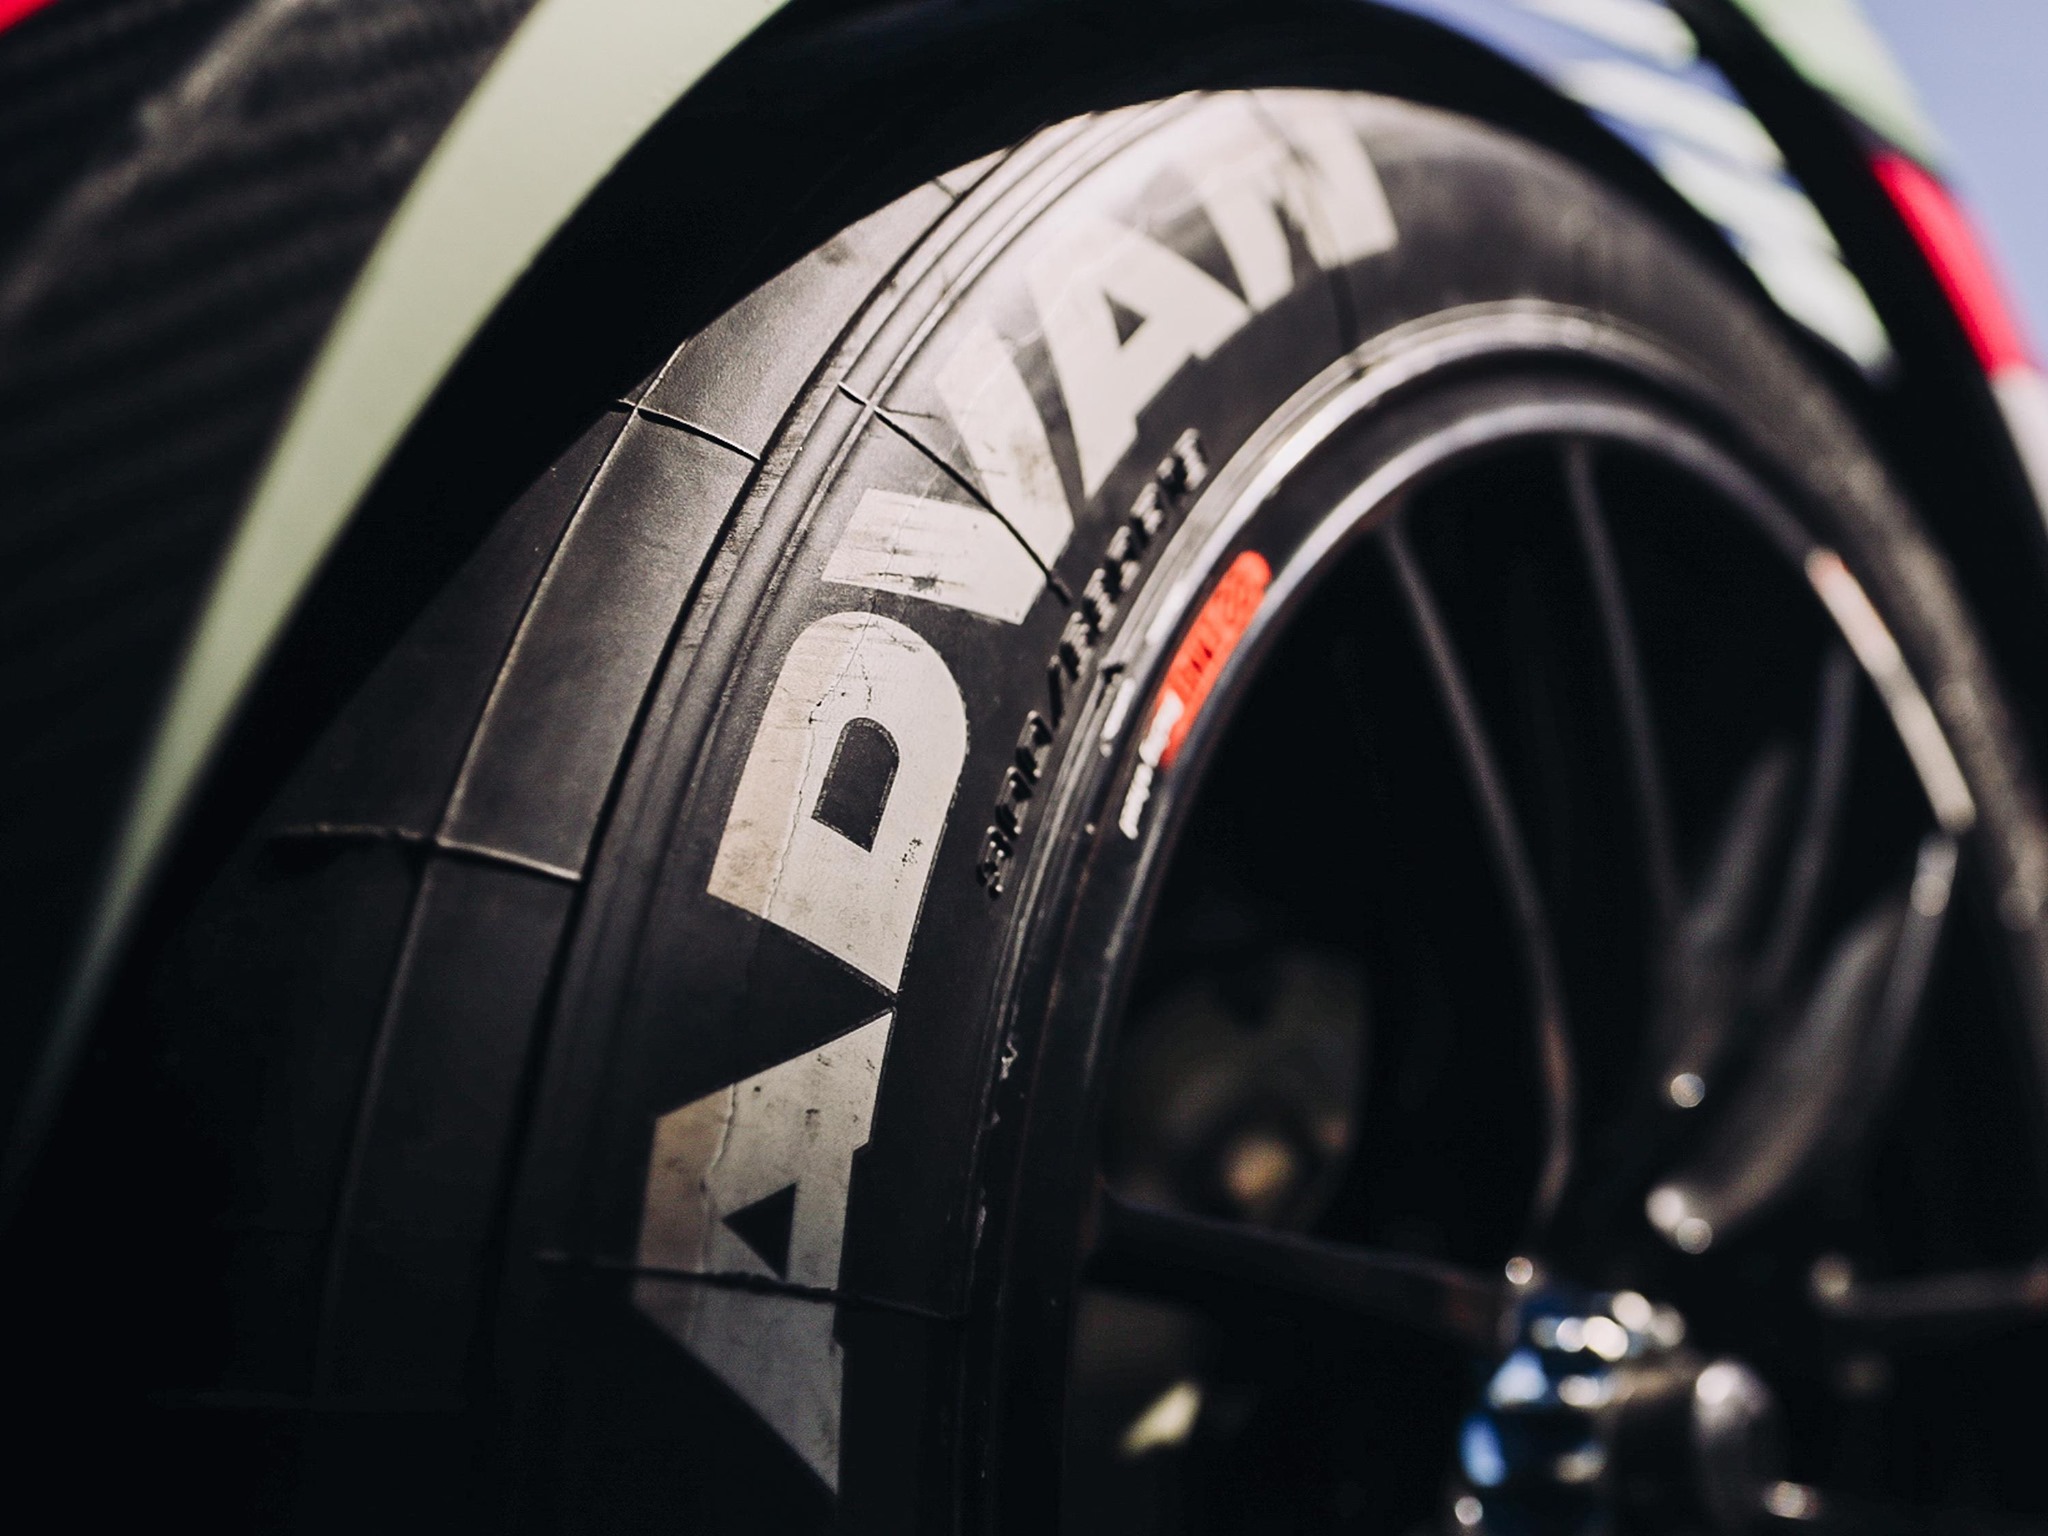 Win a Set of ADVAN APEX Tires by Yokohama with Your Acura!